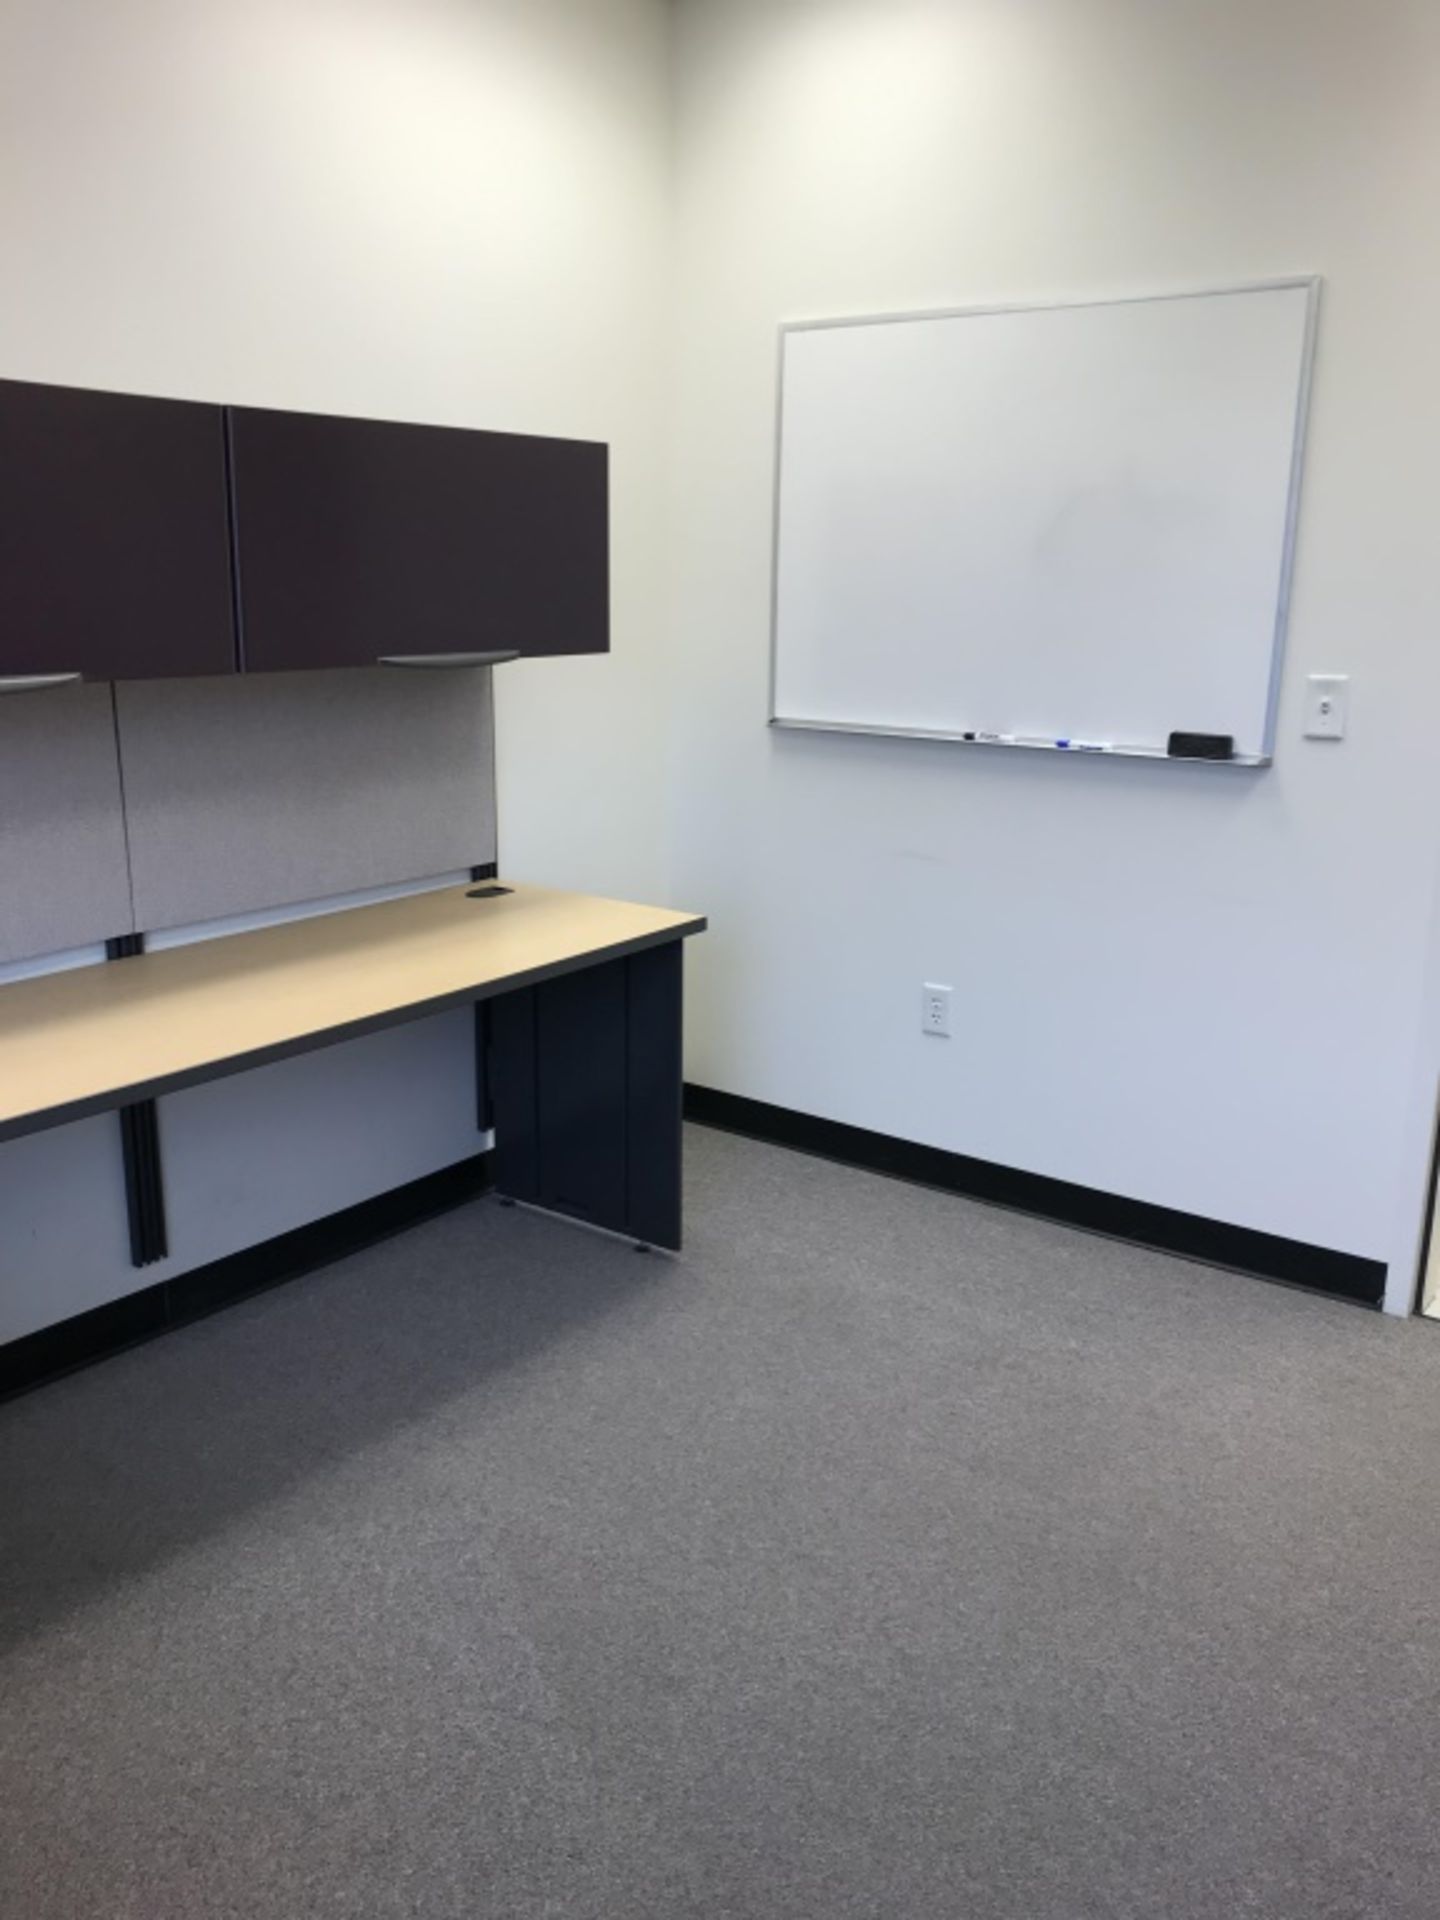 Lot of Office Furniture (Telephone System Excluded) - Image 3 of 3